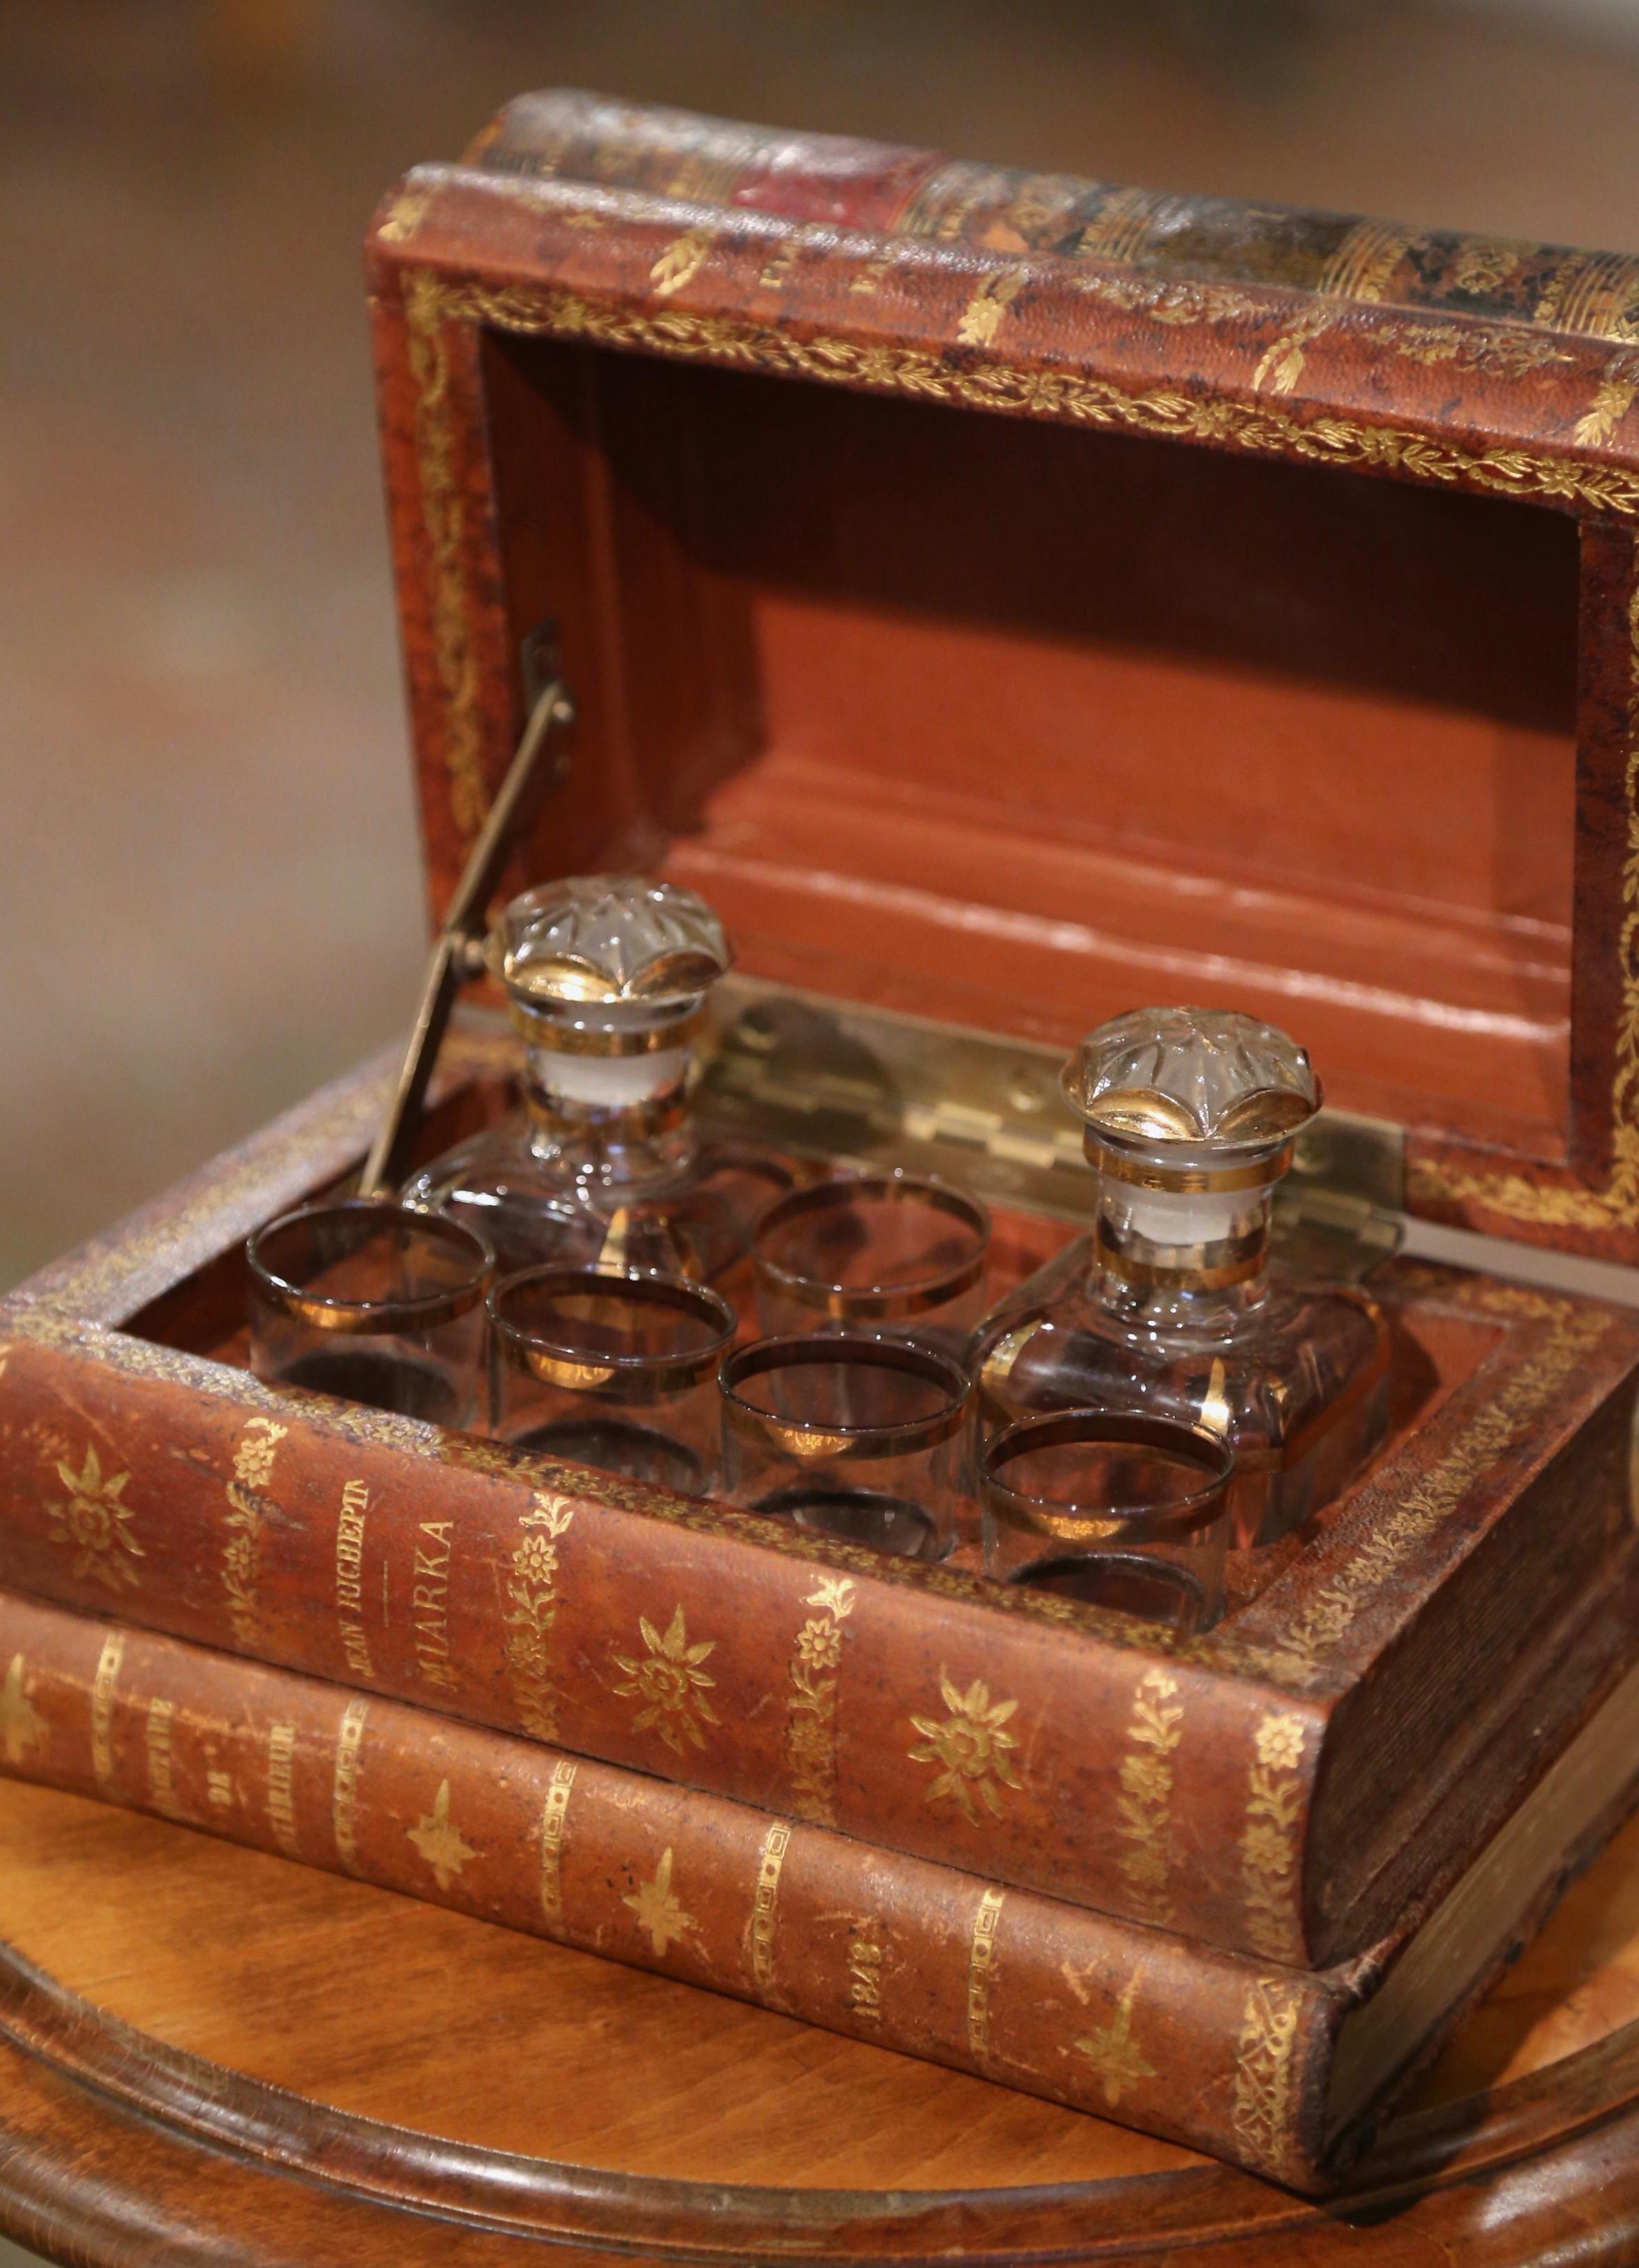 Early 20th Century French Leather Book Liquor Box with Shot Glasses and Carafes In Excellent Condition For Sale In Dallas, TX